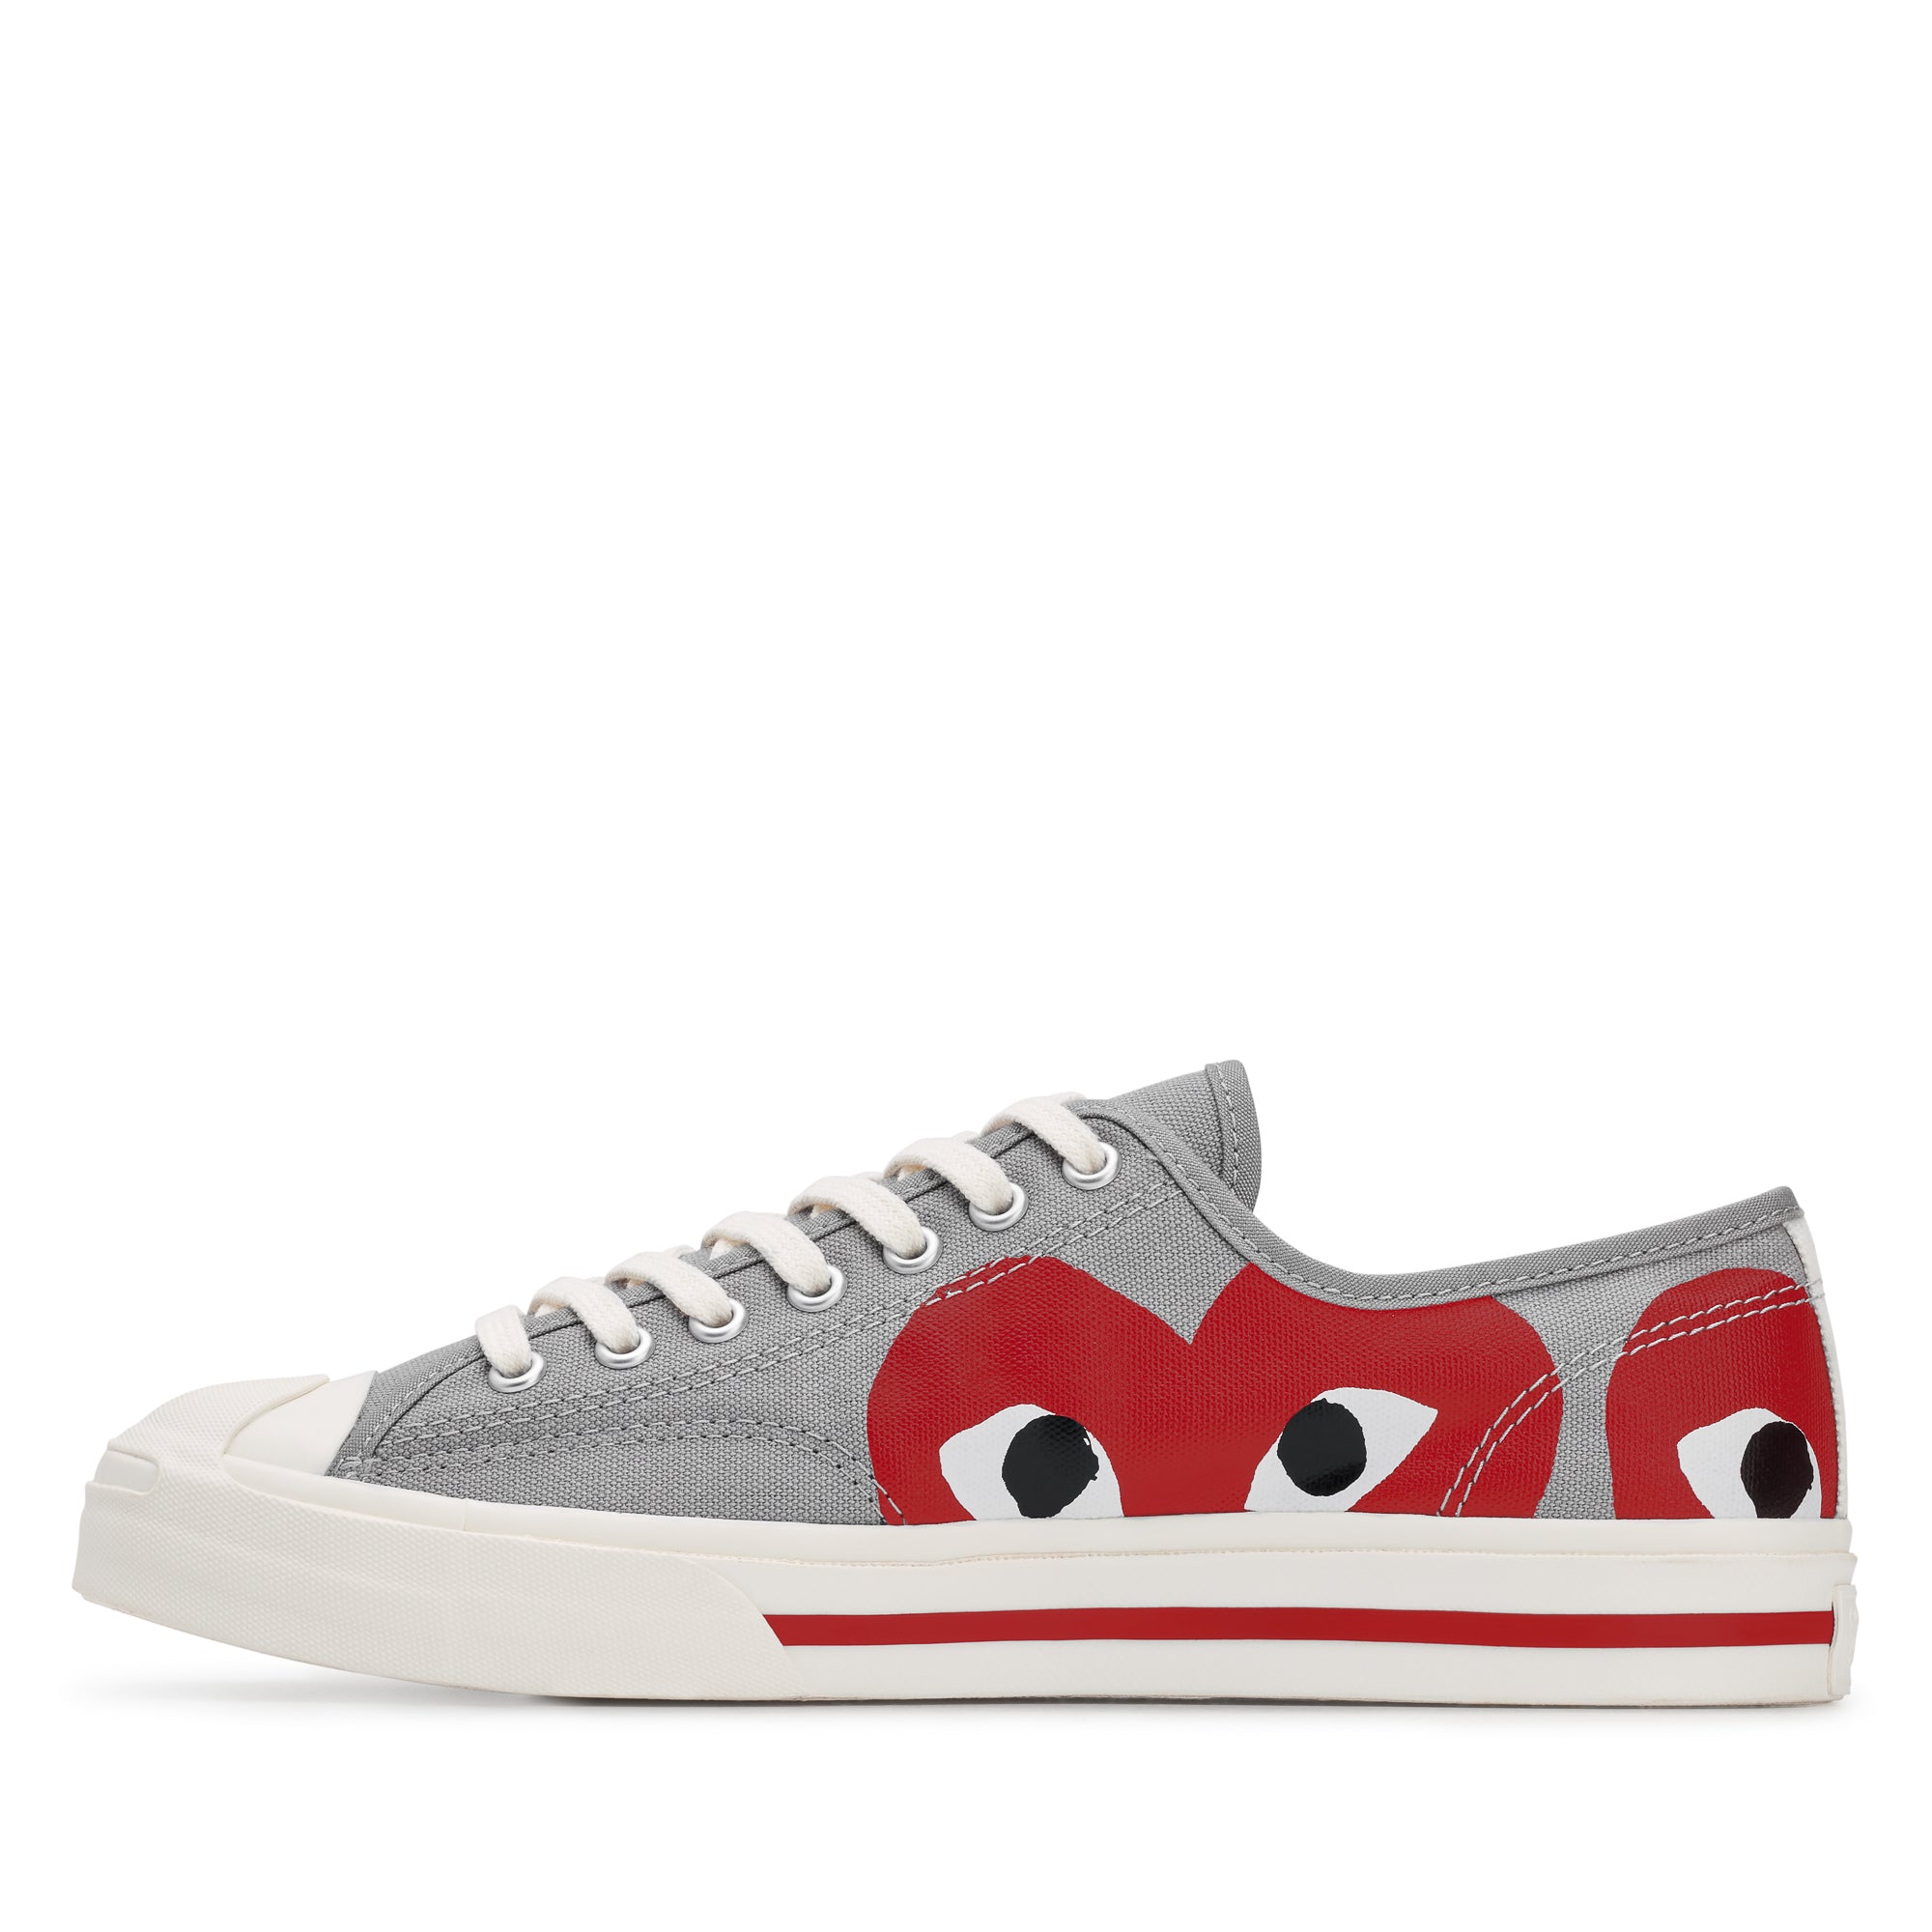 PLAY CONVERSE - Jack Purcell - (Red) view 4